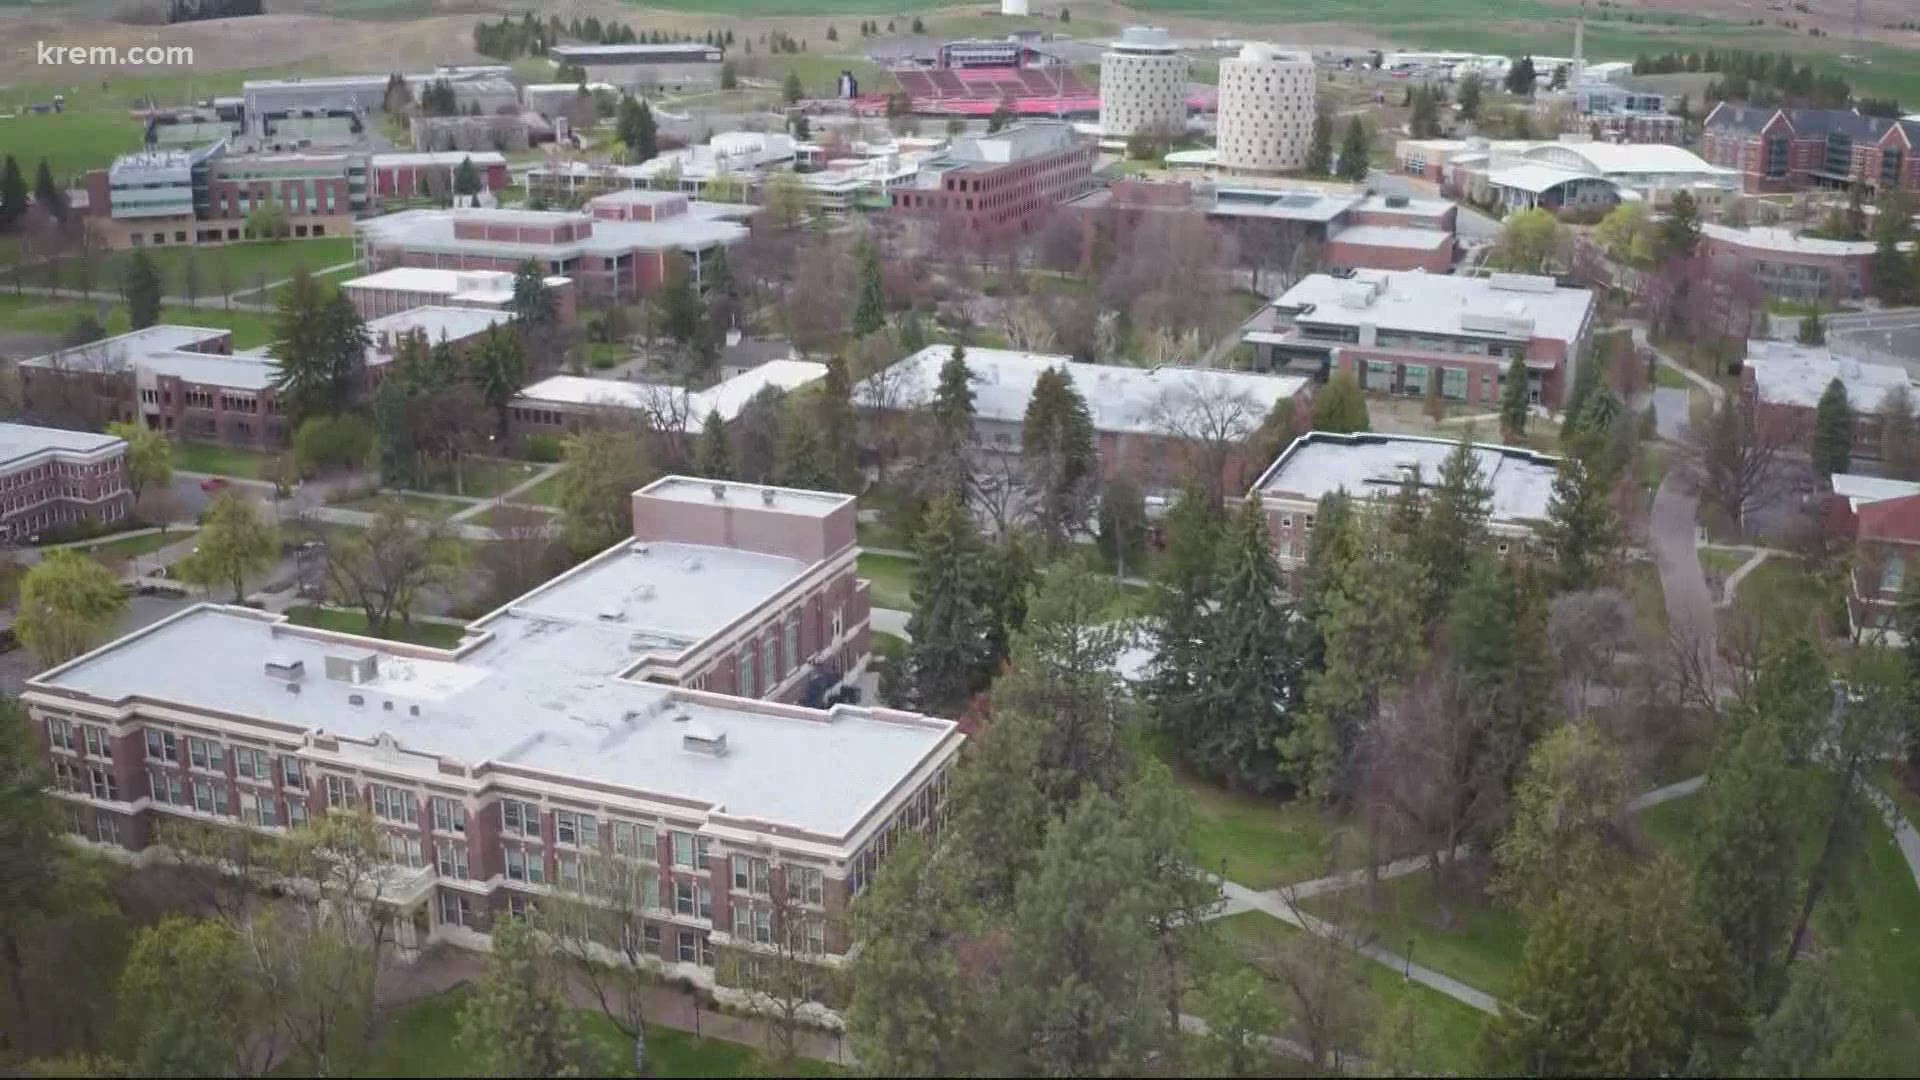 Two fraternities are in quarantine, according to an official at Eastern Washington University. Three students are currently isolating at Dryden Hall.